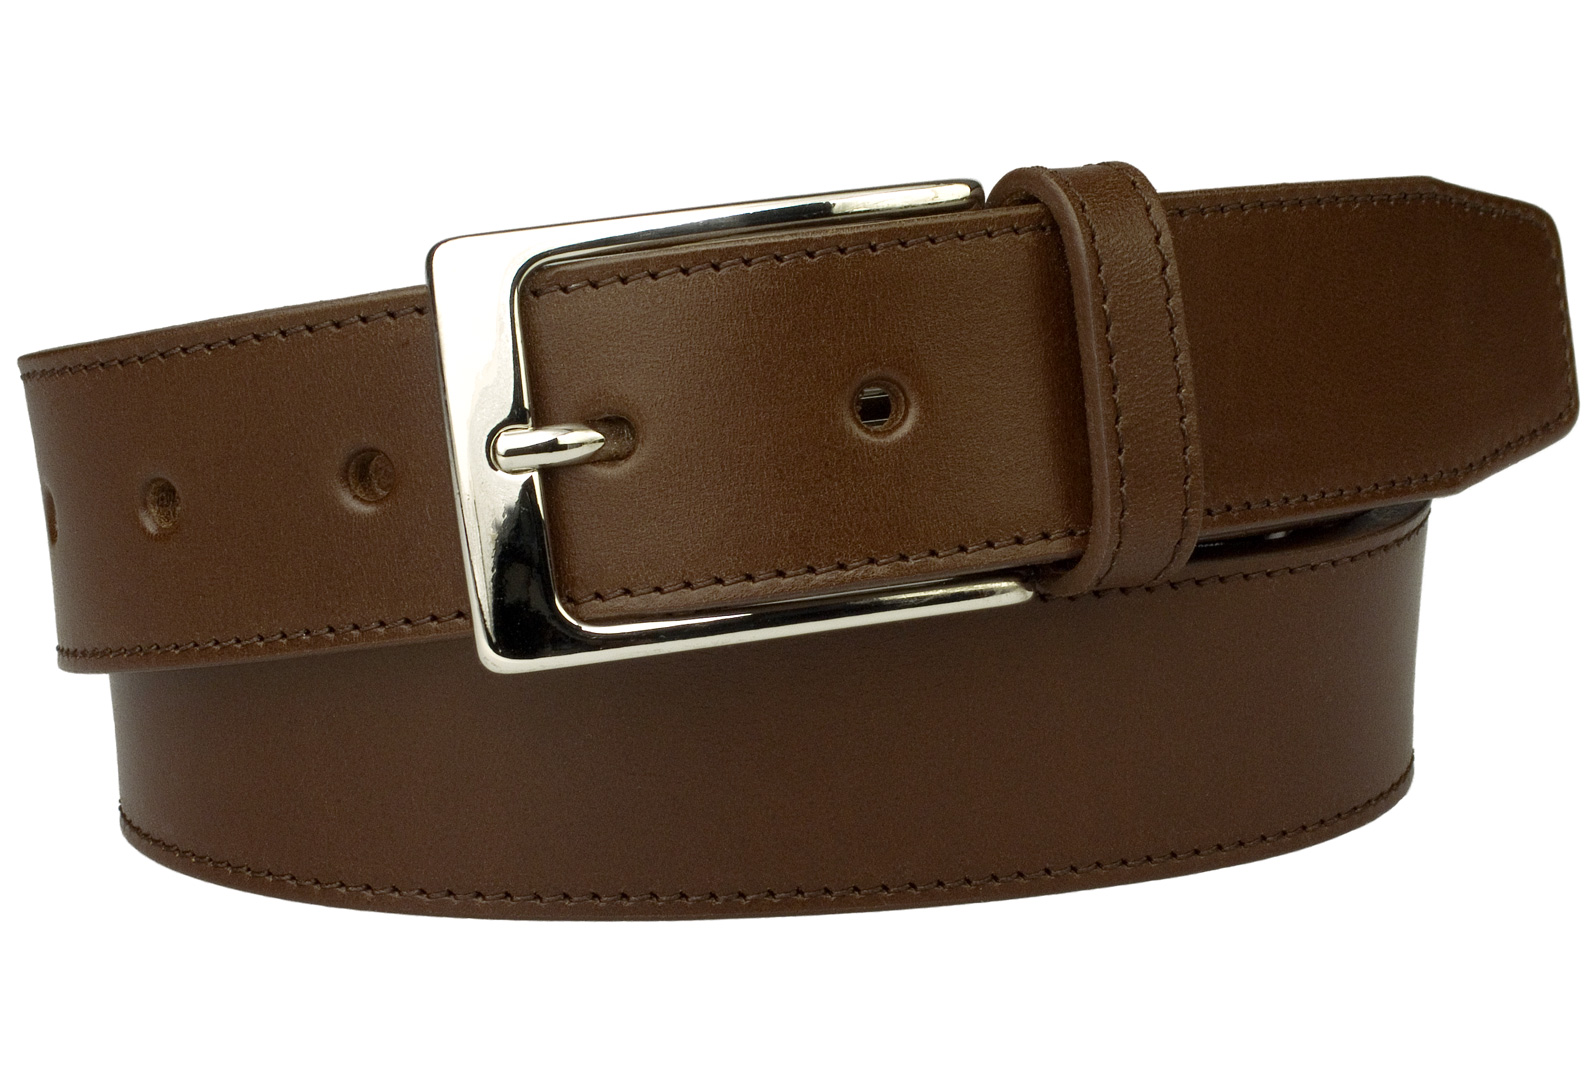 British Stitched Edge Dark Brown Leather Belt 1 3/8 Inch Wide. This high quality leather belt comes with a matching stitched edge to give a neat defined finish which compliments smart attire.